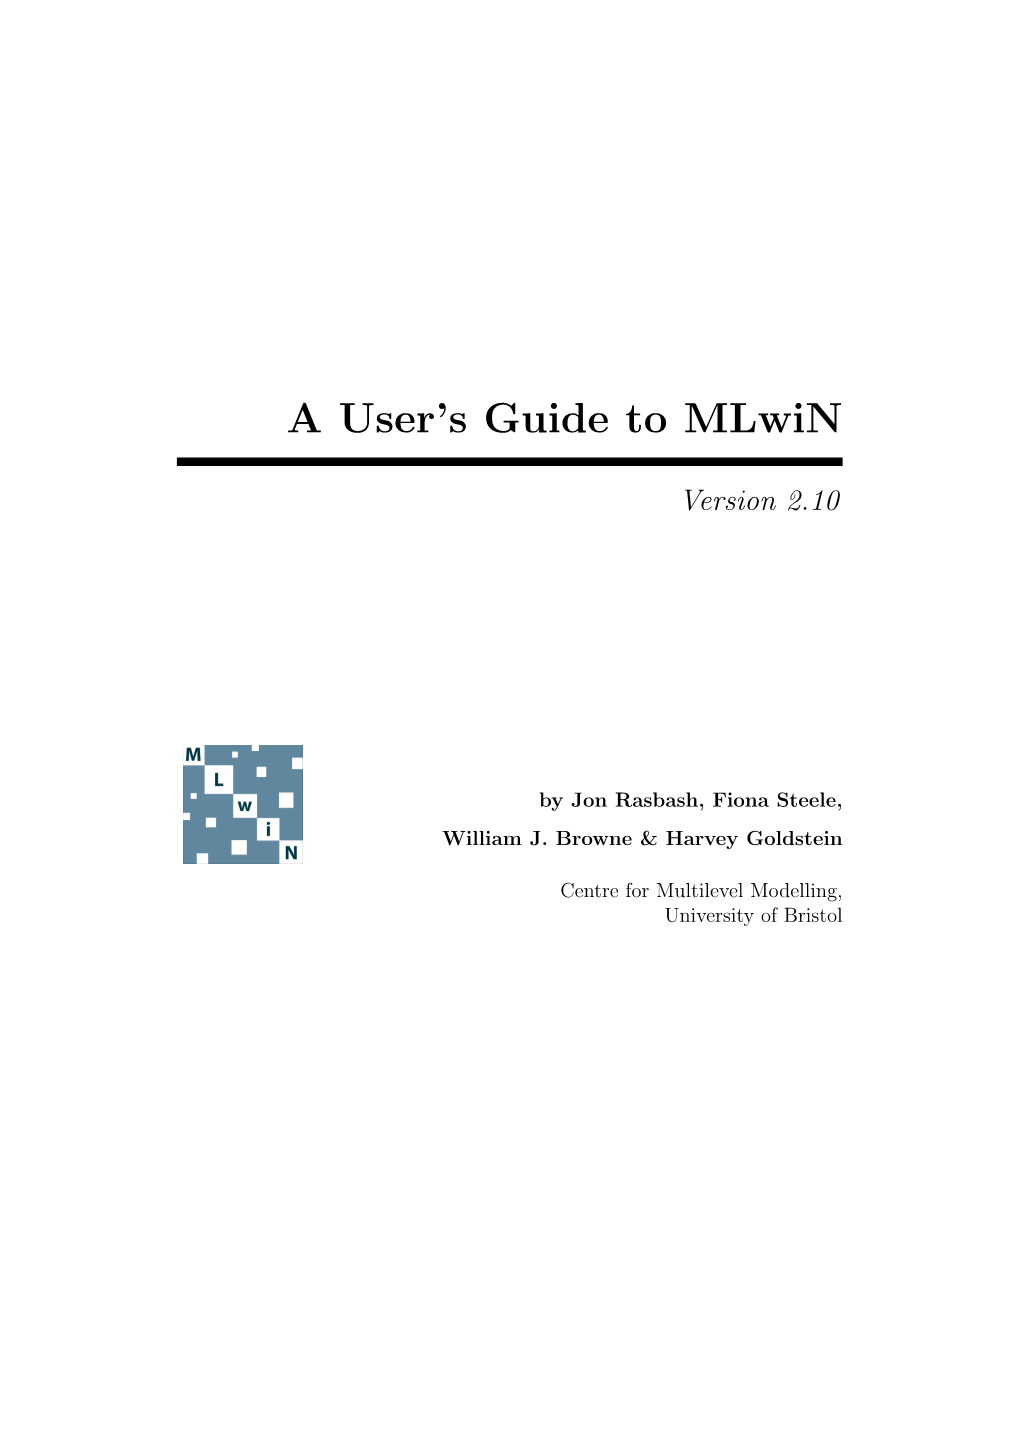 A User's Guide to Mlwin